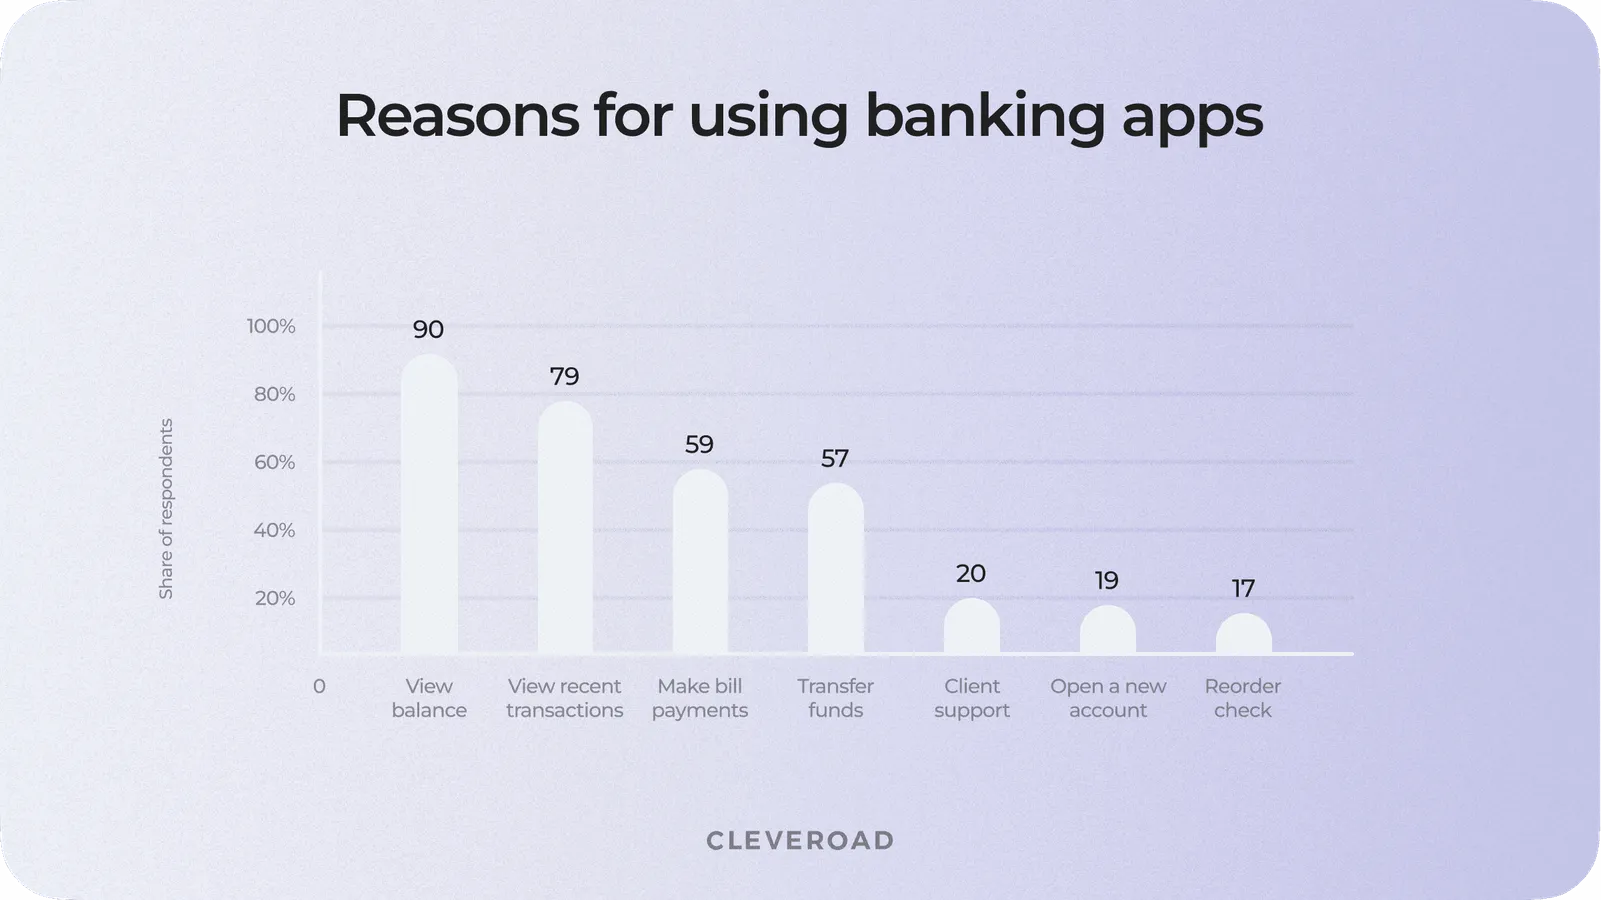 Popular mobile banking app features